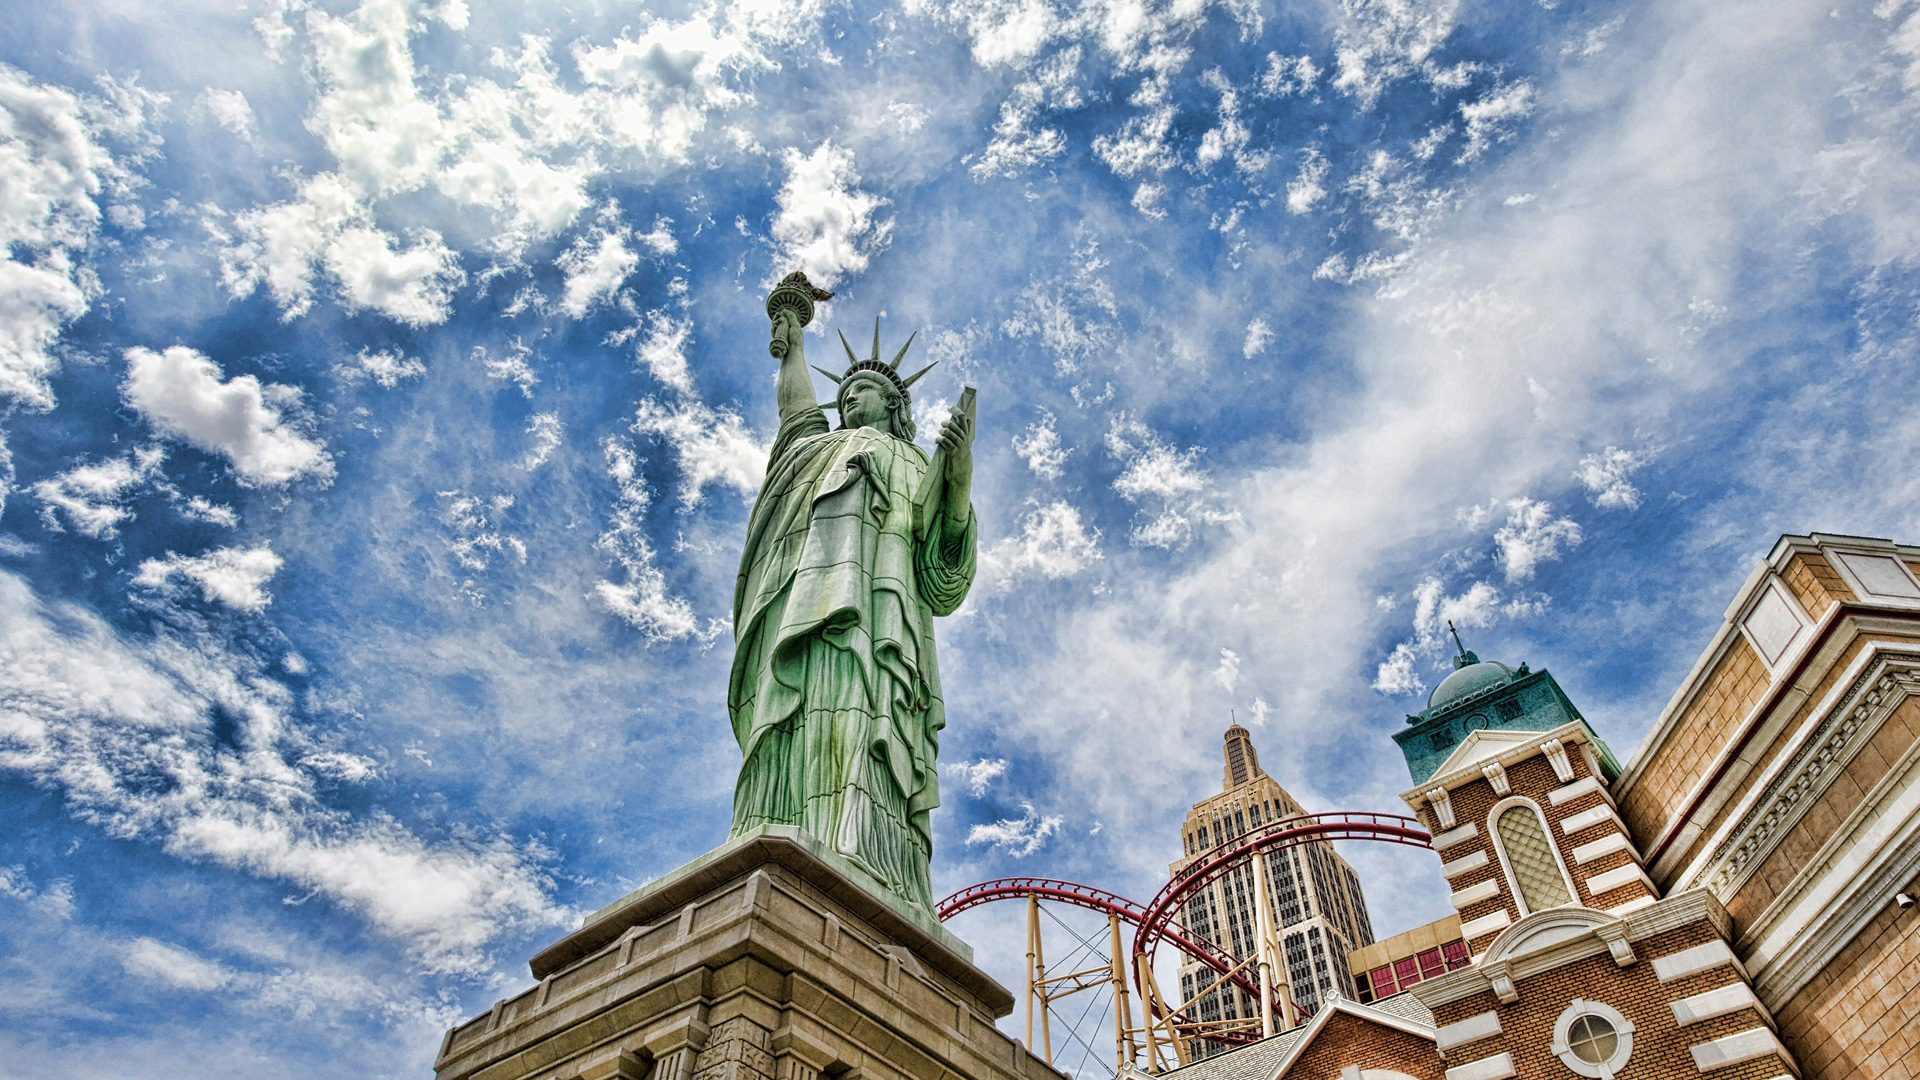 New York City HD Wallpapers a22 Statue of Liberty